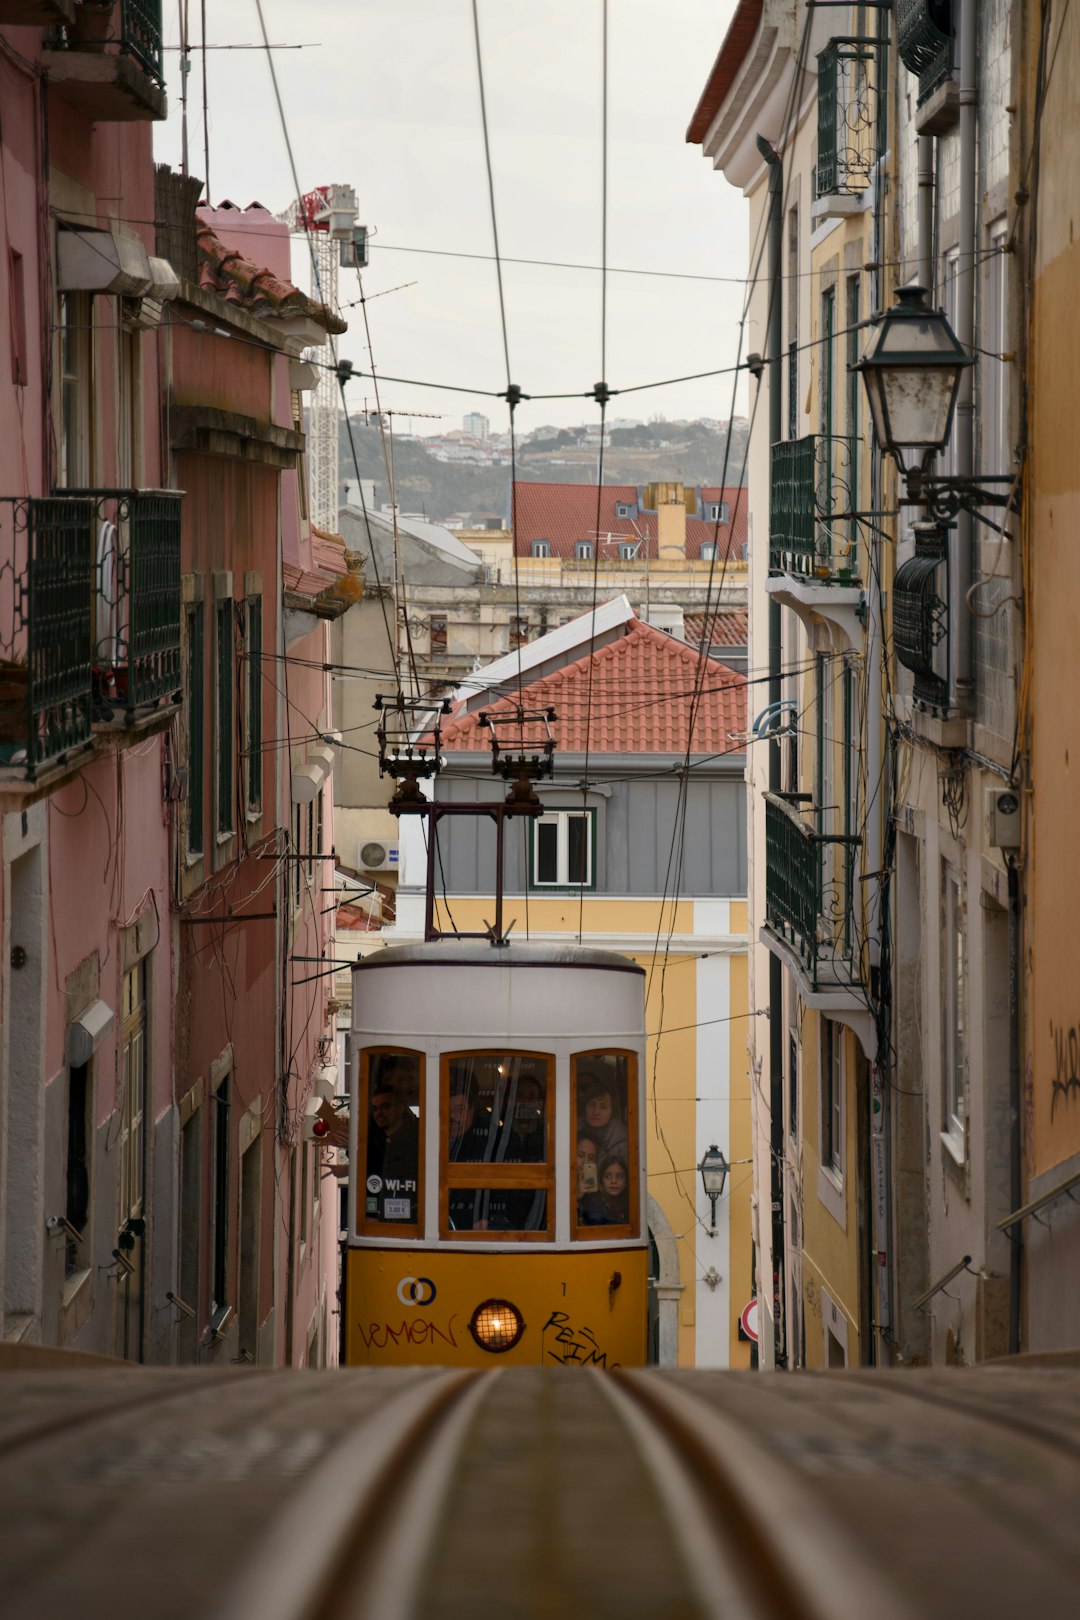 brown and white tram during daytime